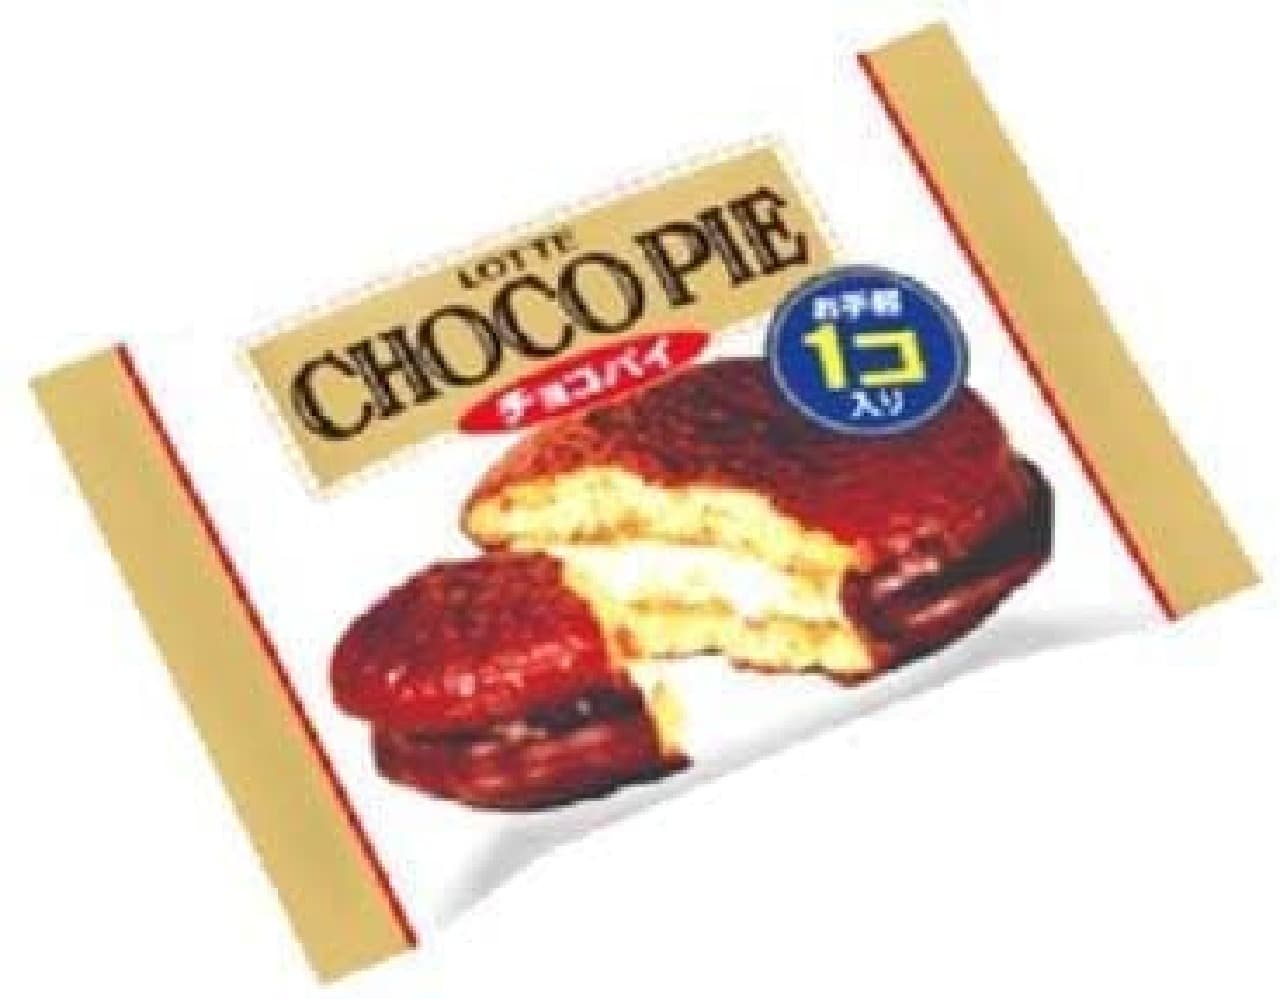 Choco pie for "Bocchi" will be on sale!